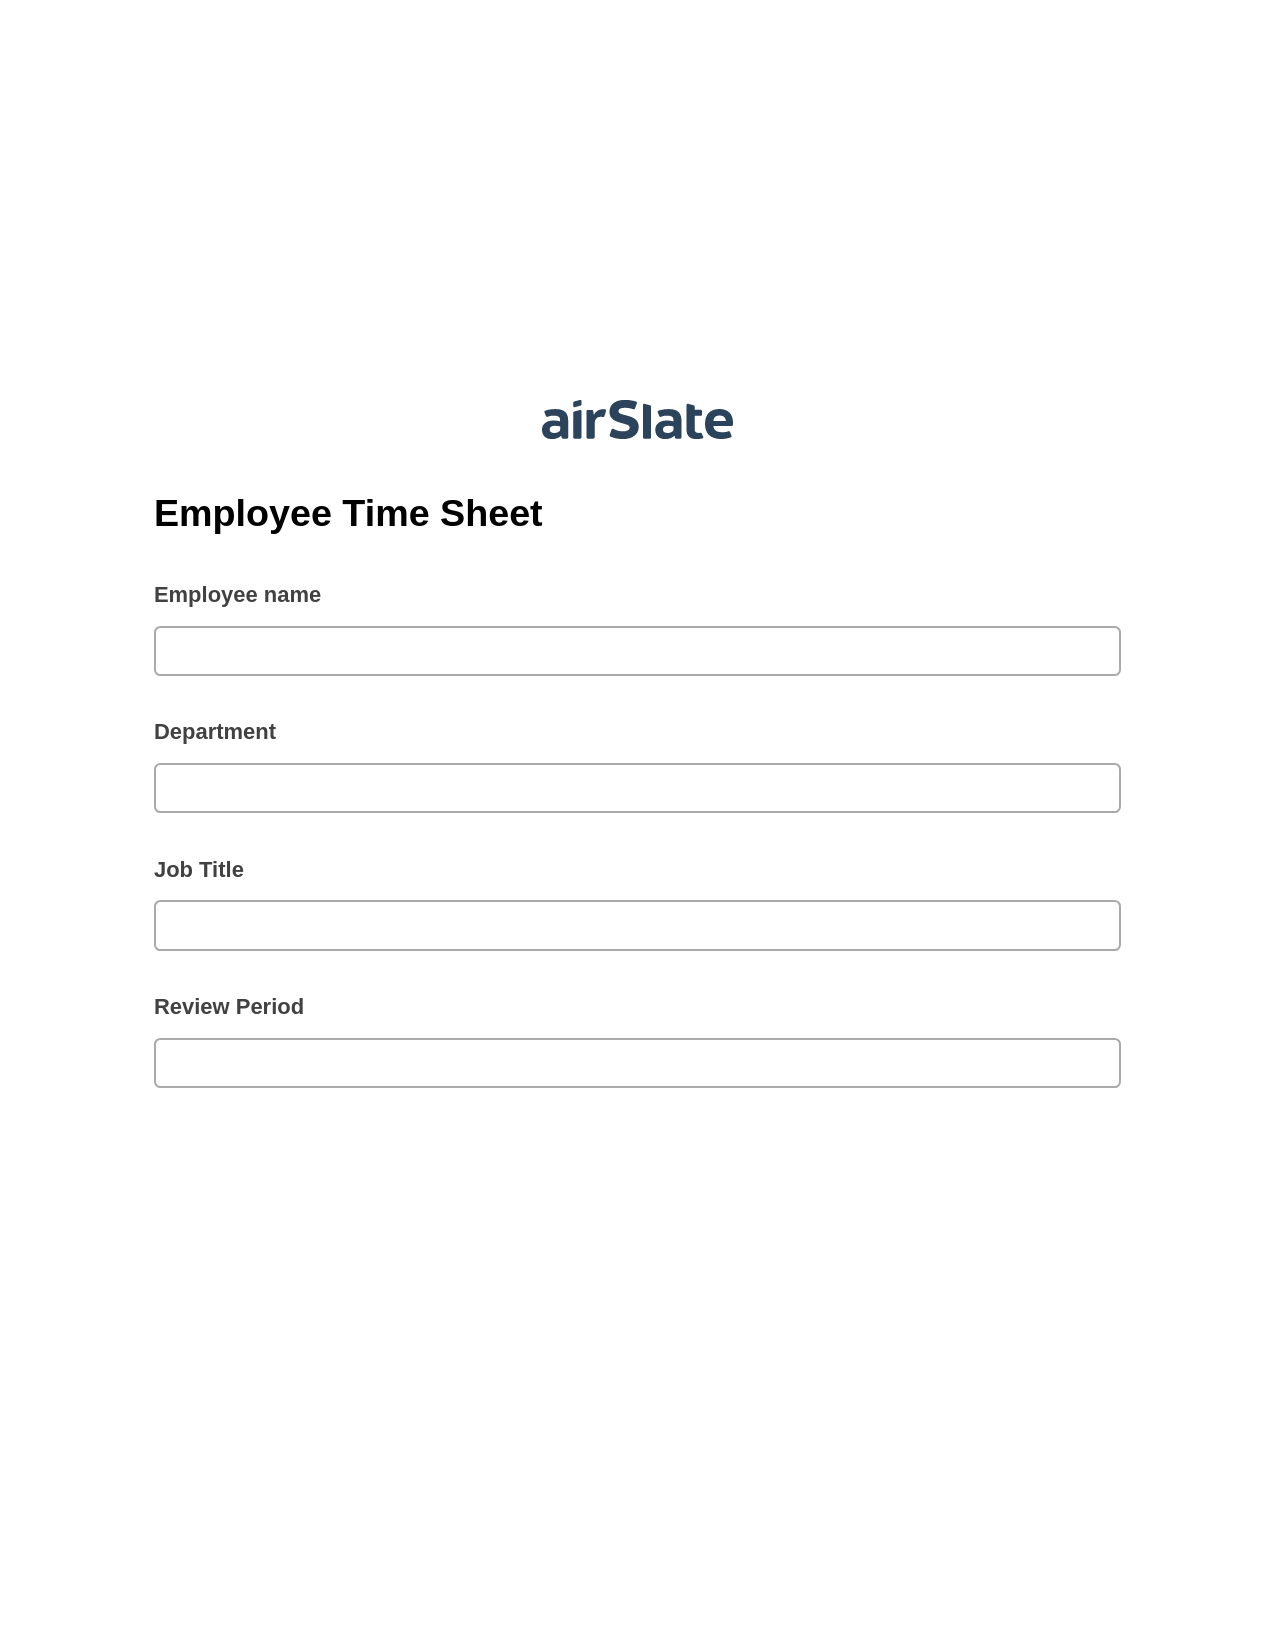 Multirole Employee Time Sheet Pre-fill from MS Dynamics 365 Records, Create slate addon, Archive to Dropbox Bot